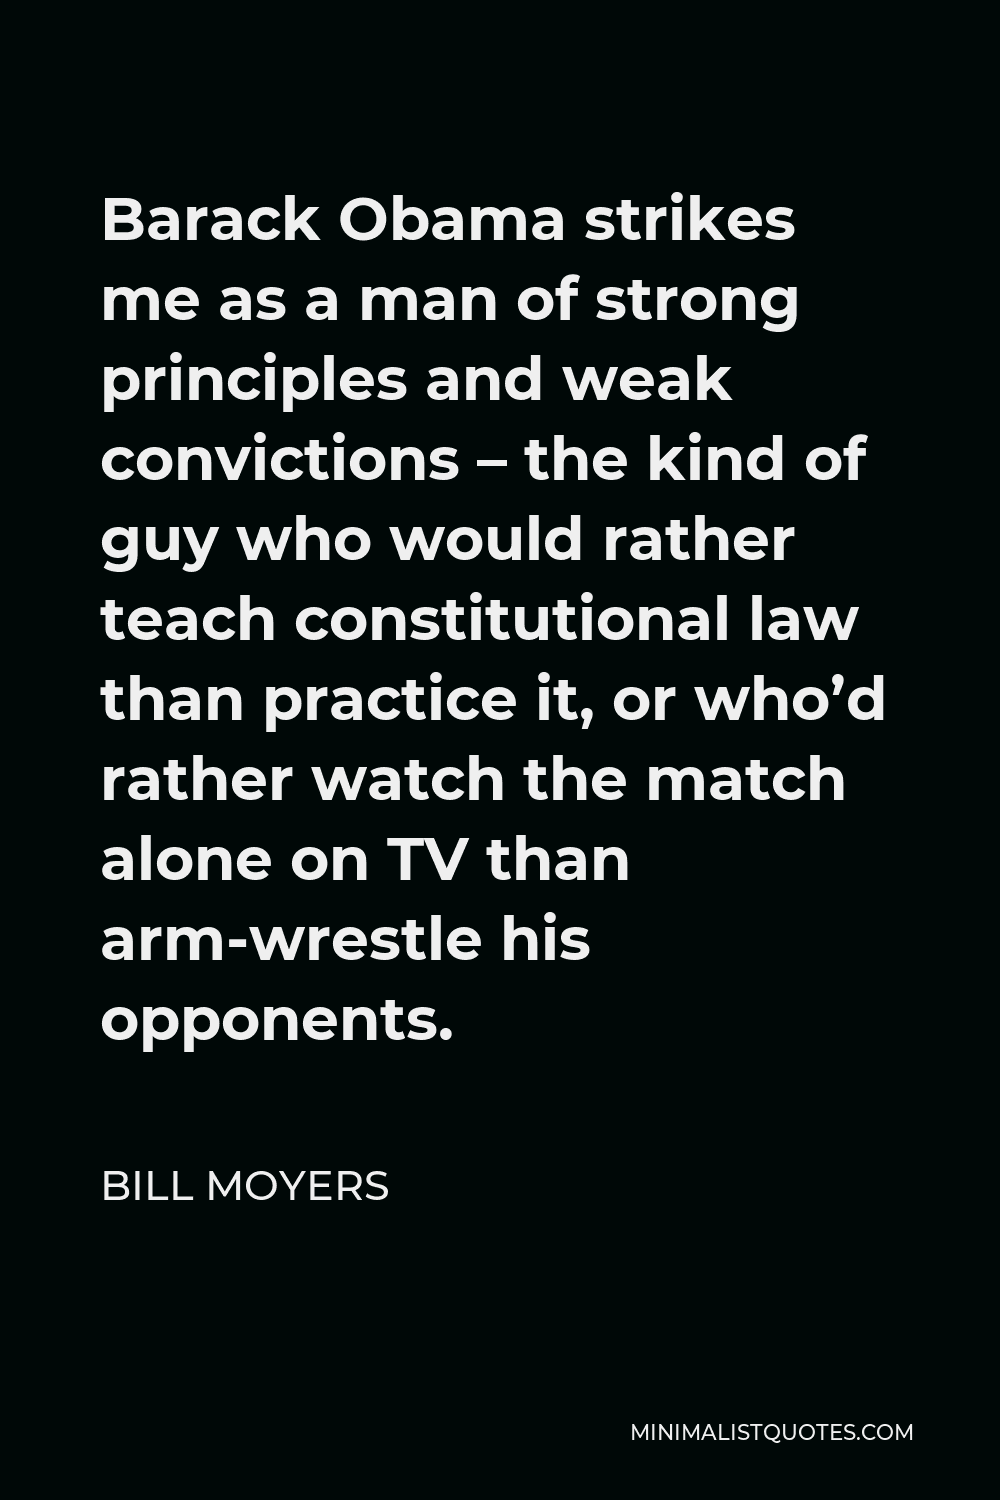 Bill Moyers Quote - Barack Obama strikes me as a man of strong principles and weak convictions – the kind of guy who would rather teach constitutional law than practice it, or who’d rather watch the match alone on TV than arm-wrestle his opponents.